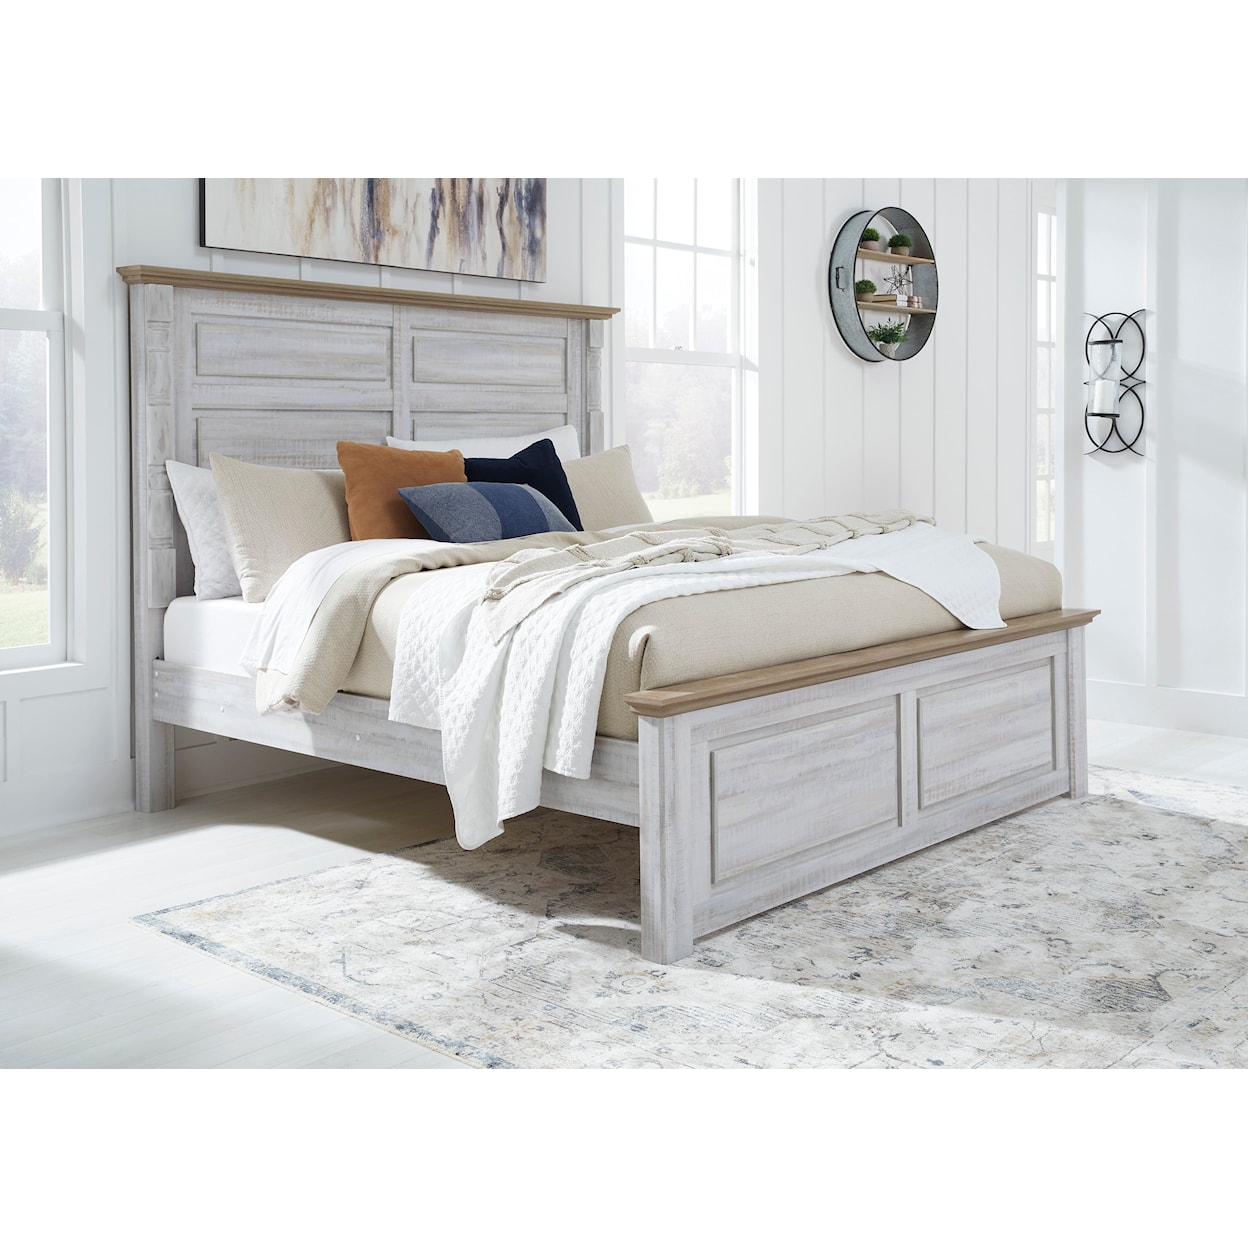 Signature Haven Bay King Panel Bed